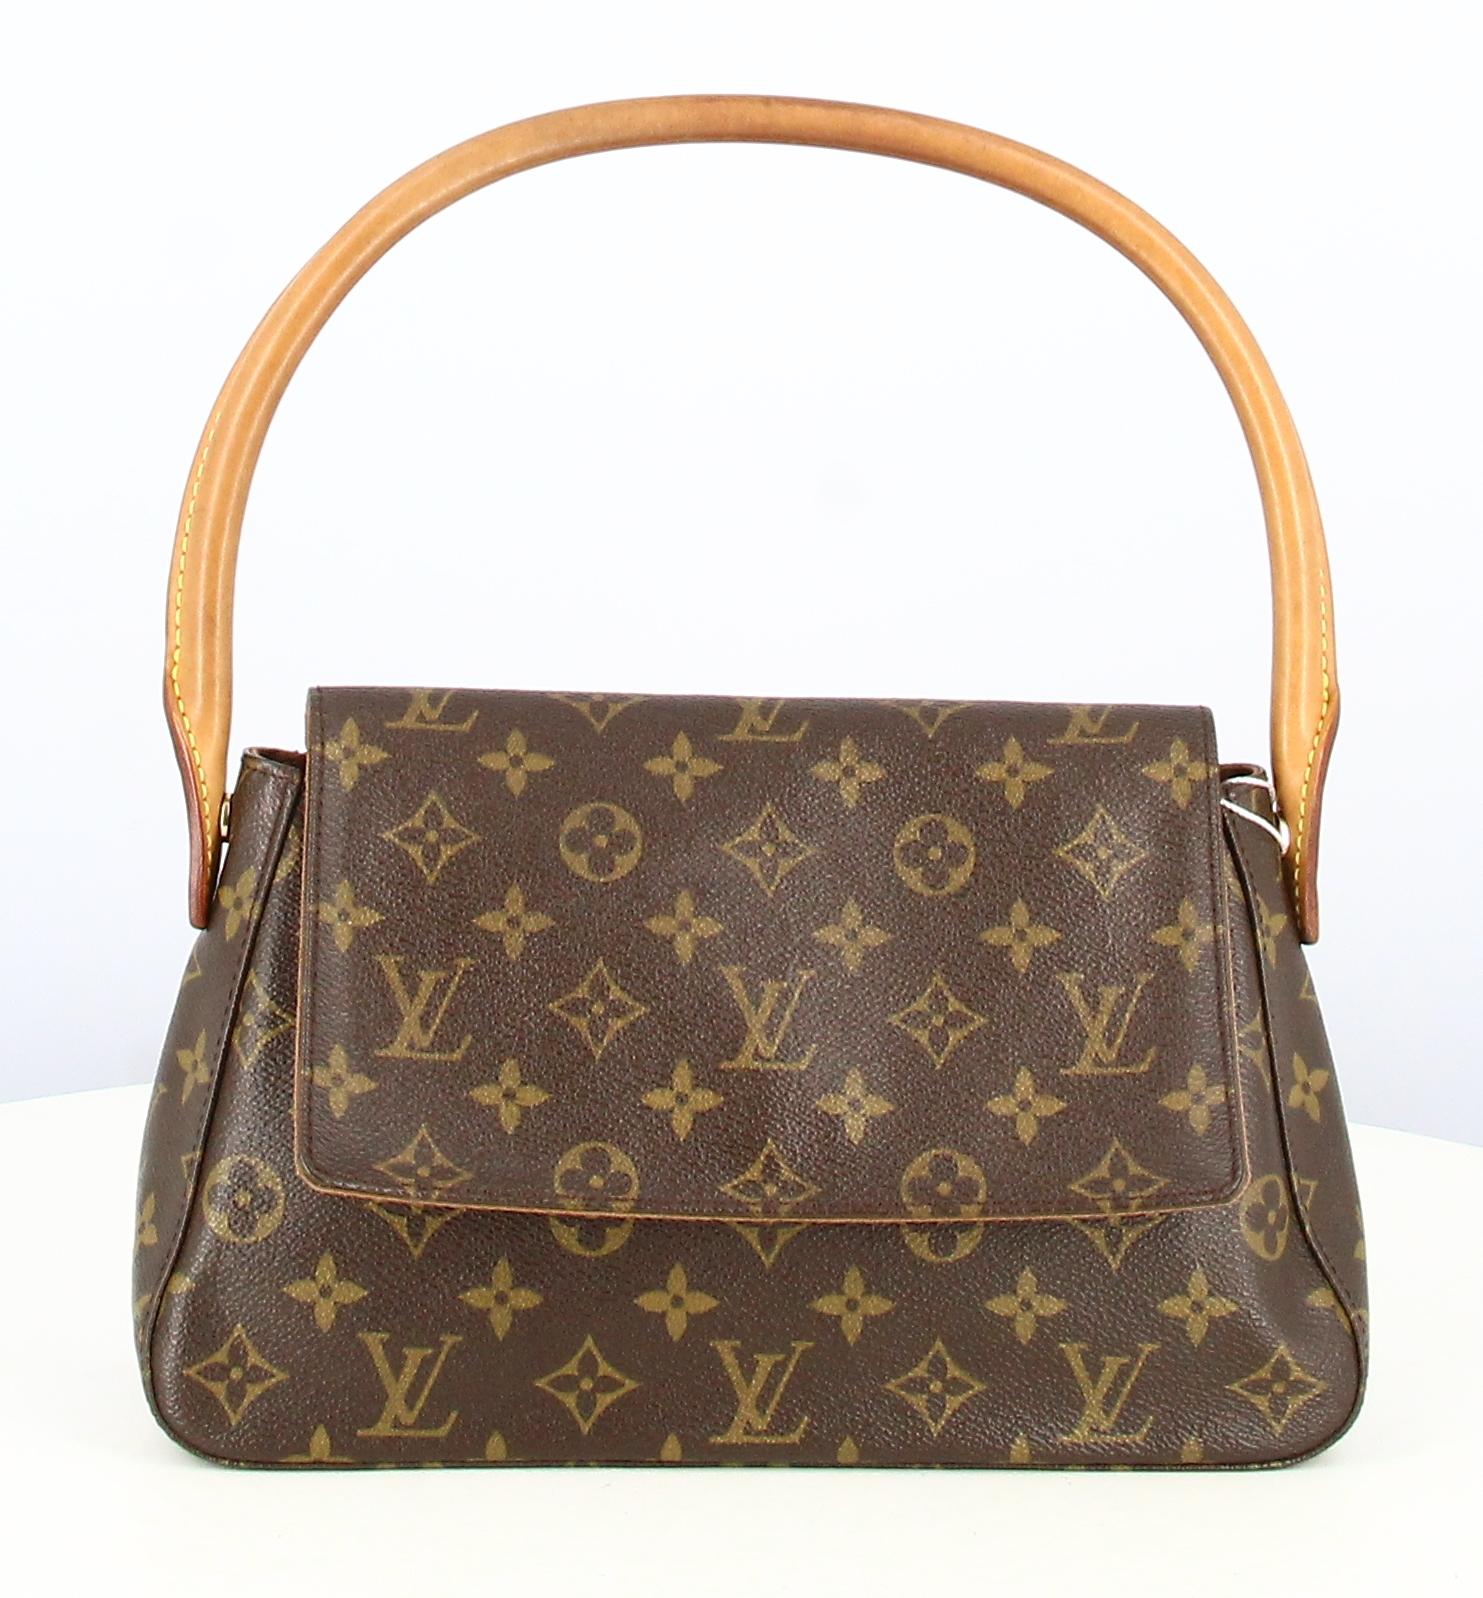 2001 Louis Vuitton Monogram canvas handbag 

- Very good condition. Shows no signs of wear over time.
- Louis Vuitton Handbag 
- Monogram canvas
- Brown leather straps 
- Inside: small zipped pocket 
- Clasp: golden press stud